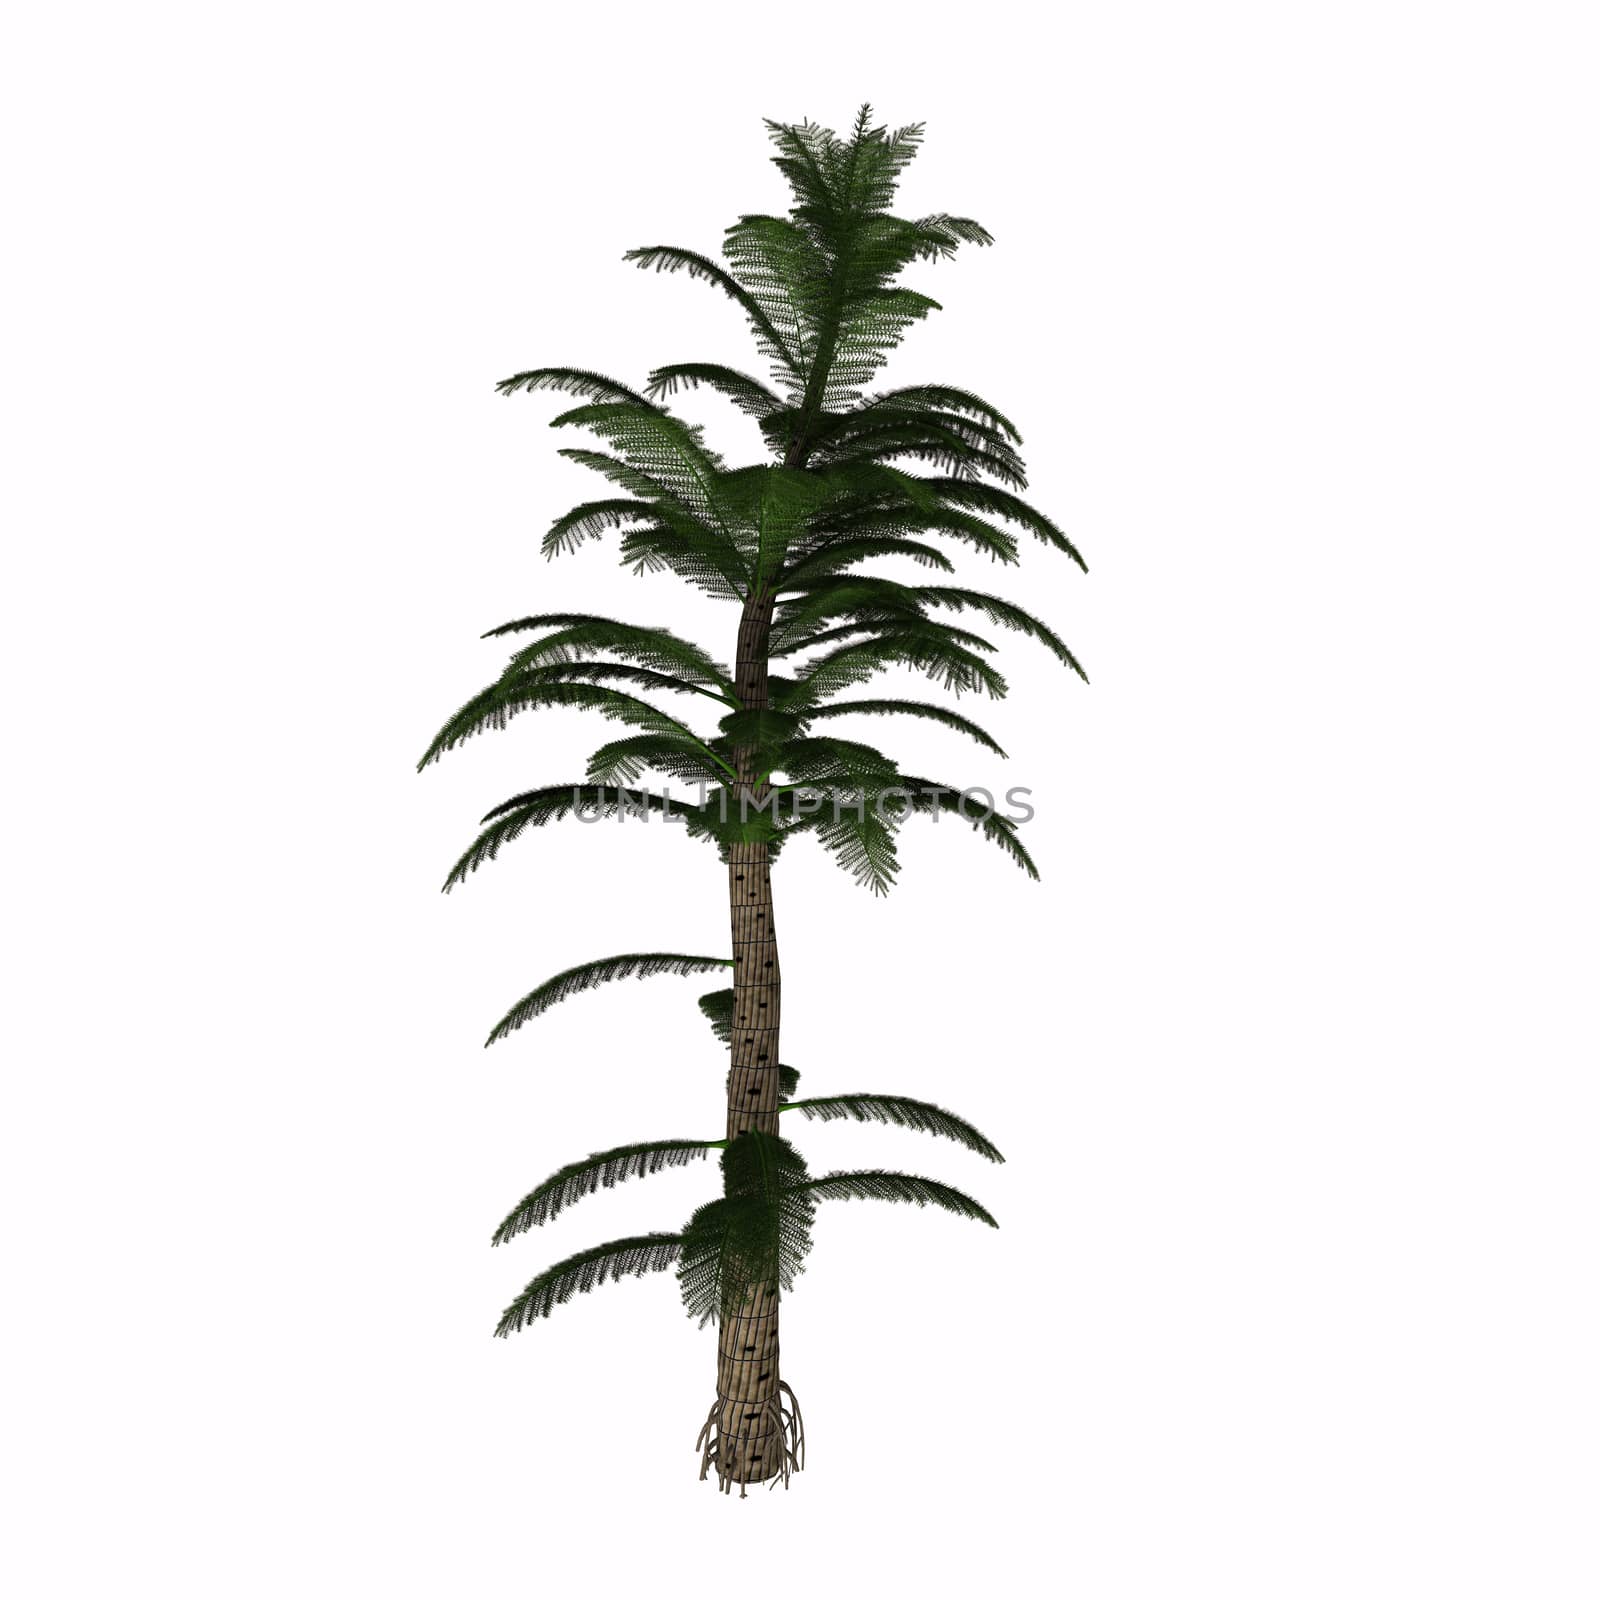 Calamites are a type of horsetail plant that lived in the coal swamps of the Carboniferous Period. They were prehistoric relatives of the modern horse tail, but looked more like a pine tree and grew up to 40 to 100 feet. 